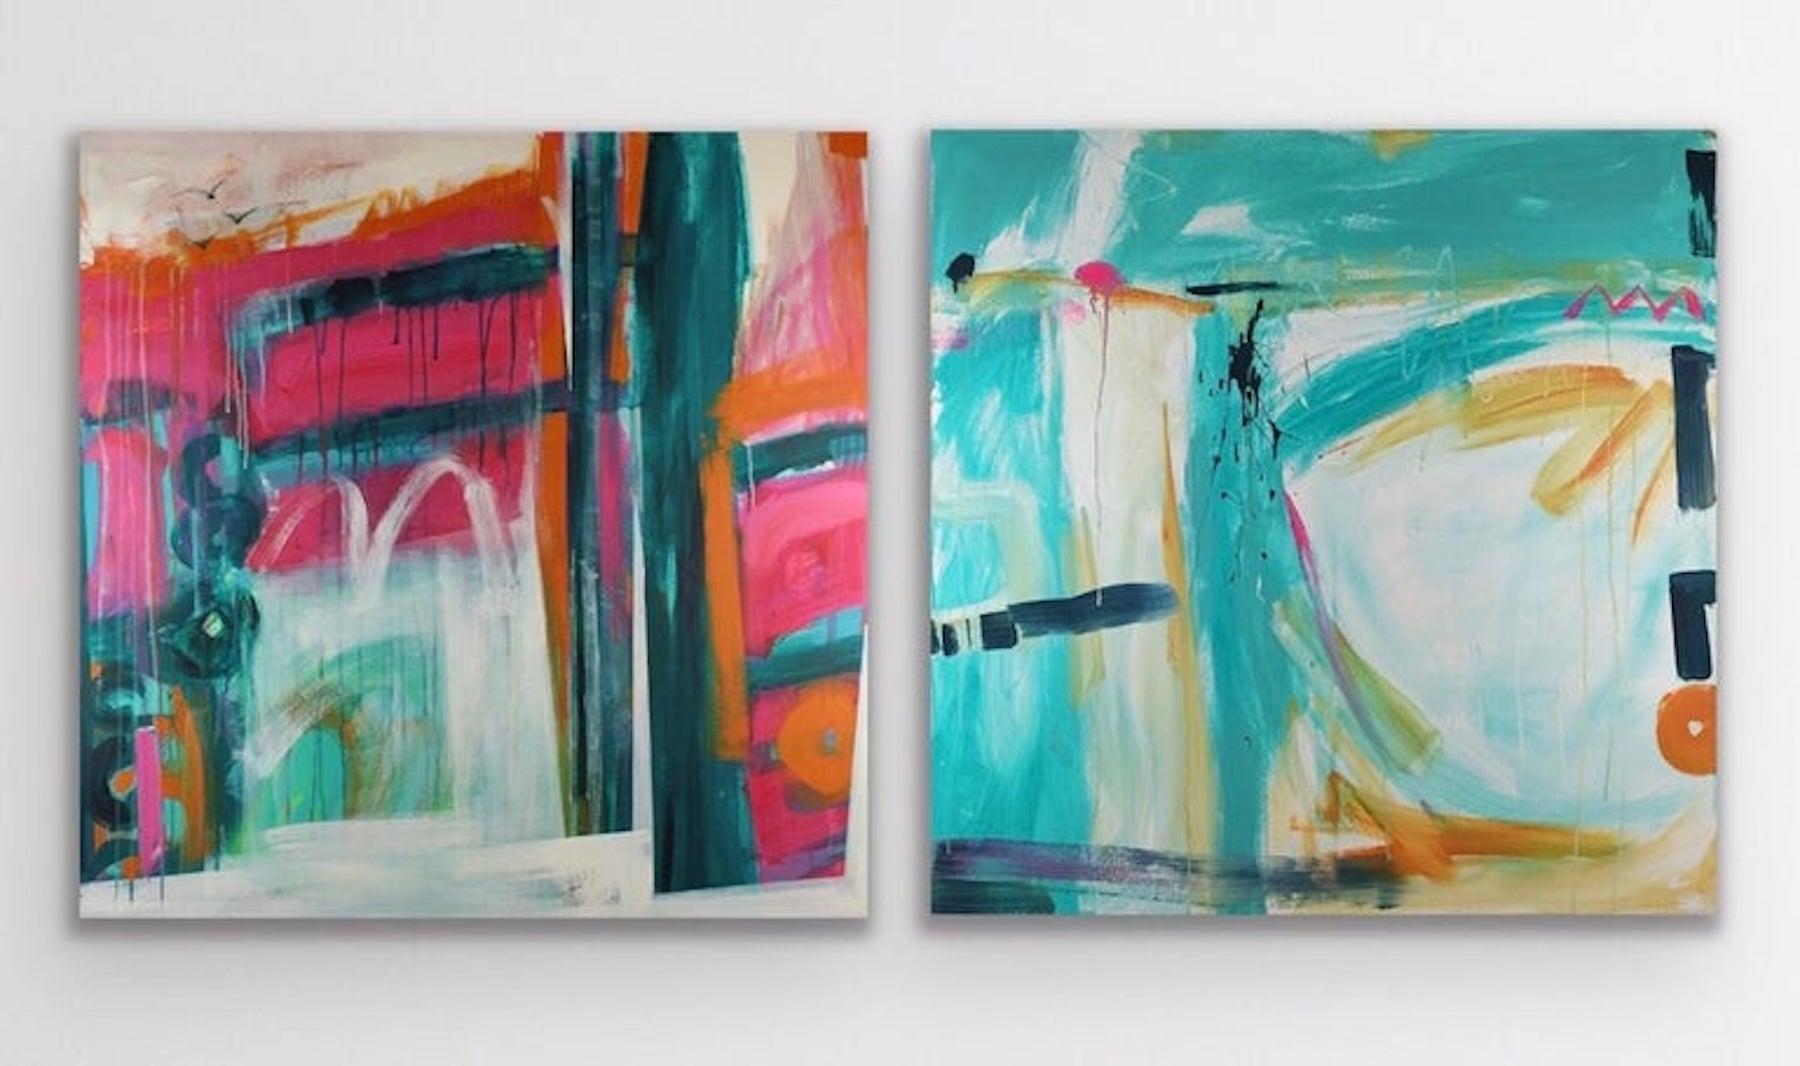 Distant Memory St Ives and Walk This Land diptych, Bright Abstract Cornish Art - Gray Abstract Painting by Liese Webley